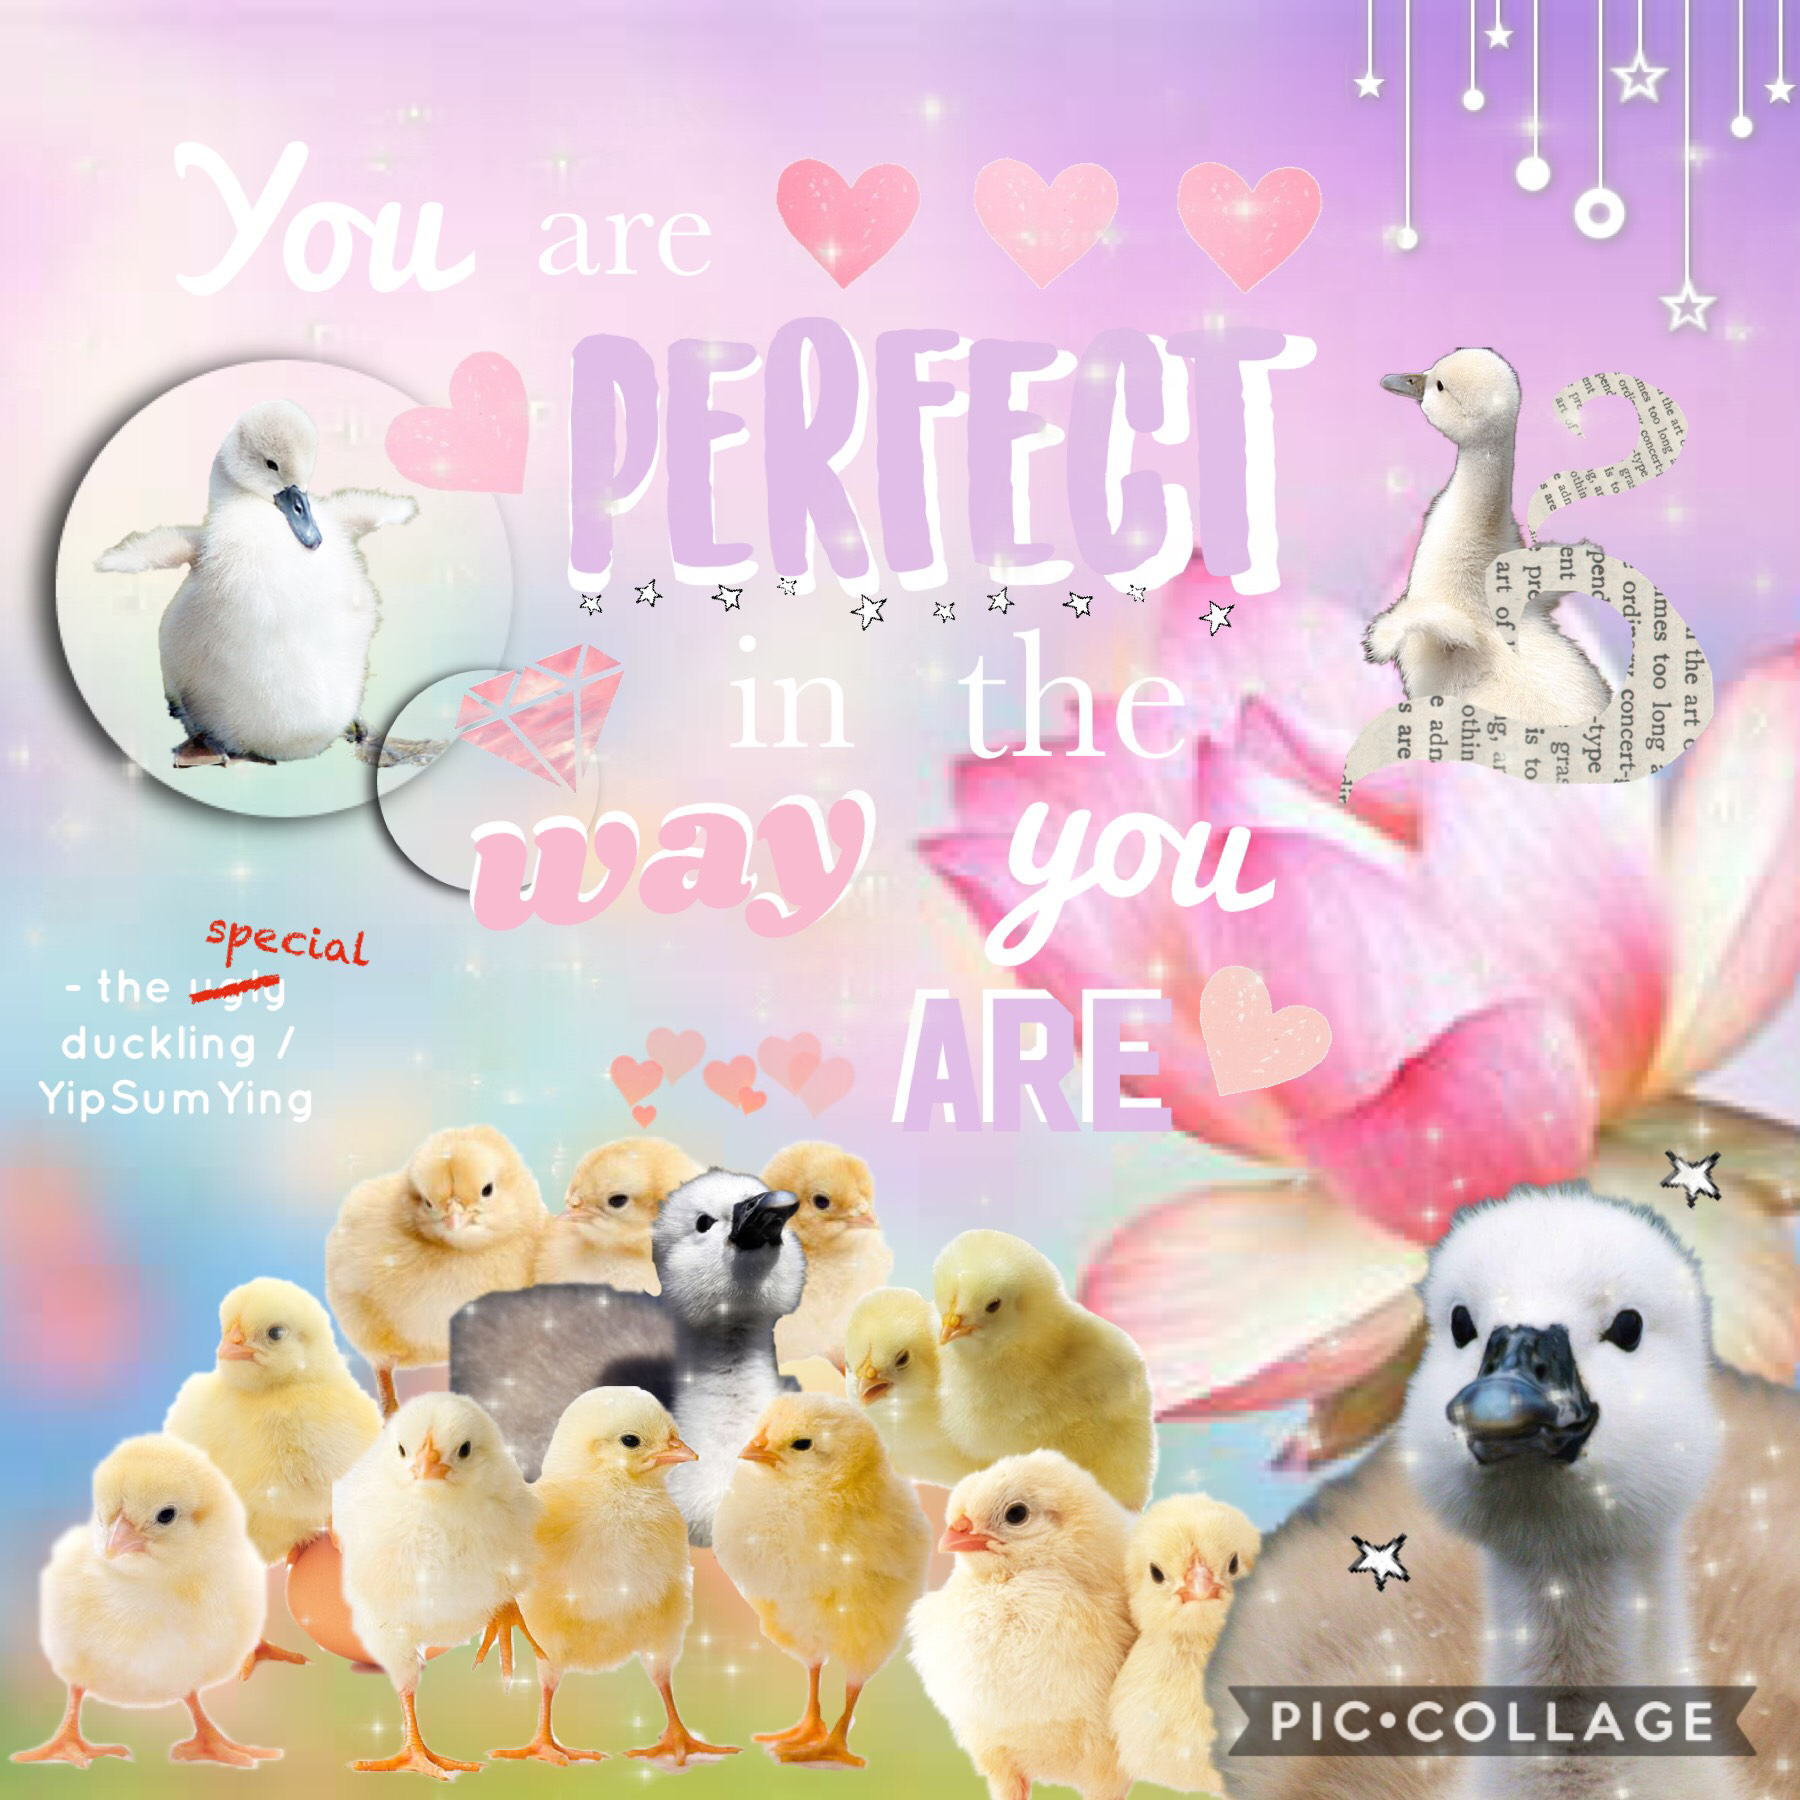 💕The special duckling 💕